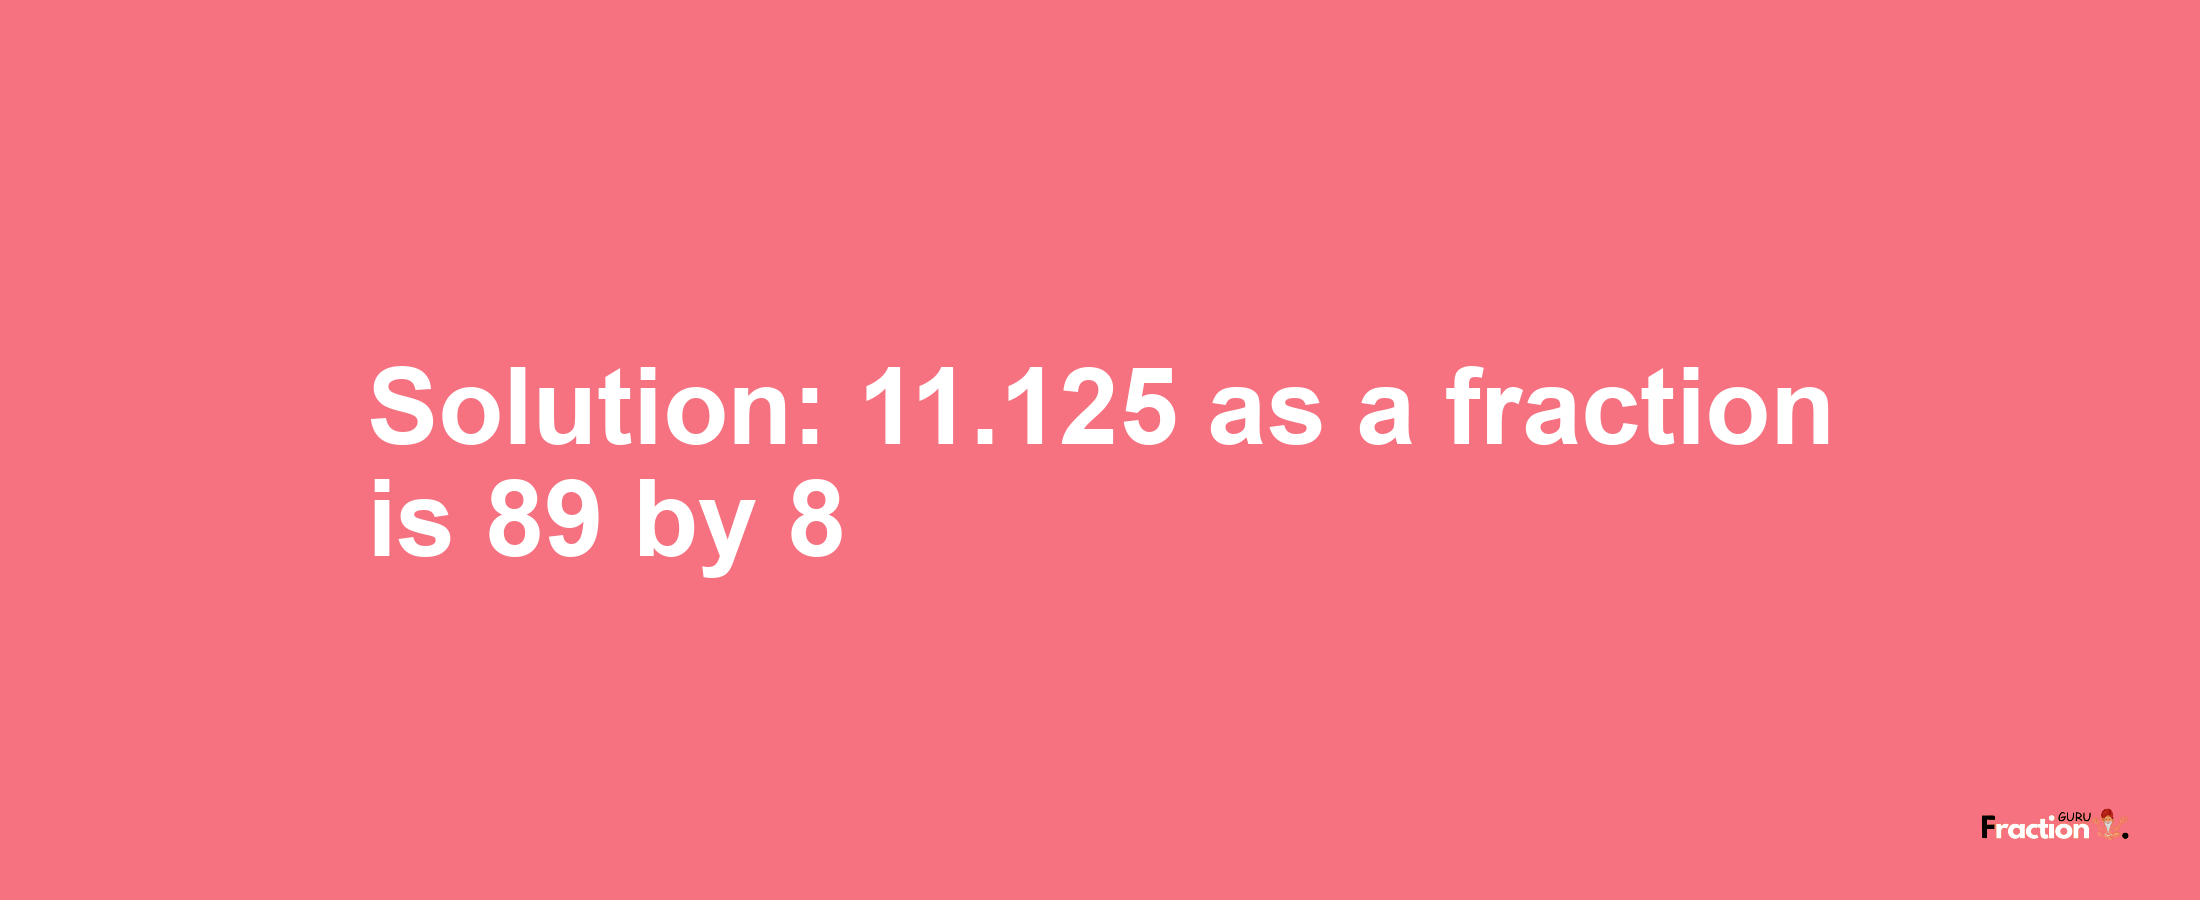 Solution:11.125 as a fraction is 89/8